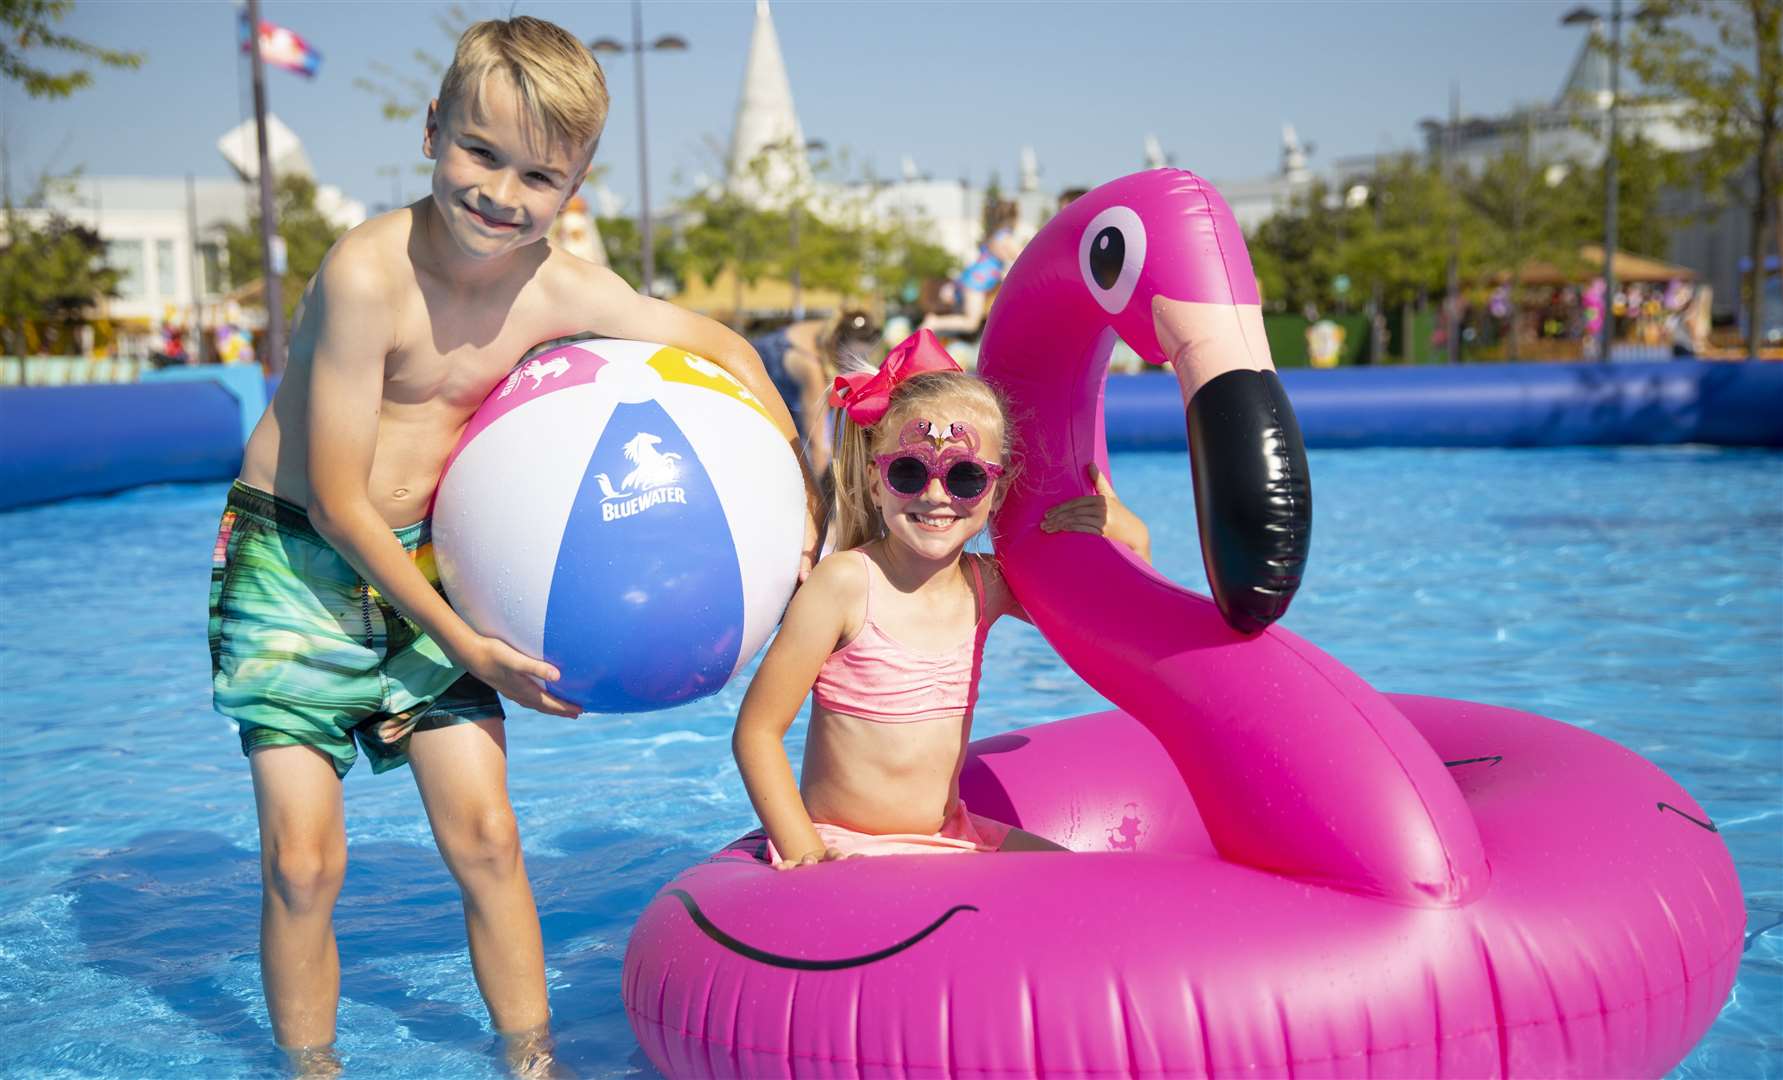 The Beach at Bluewater is returning for a third summer